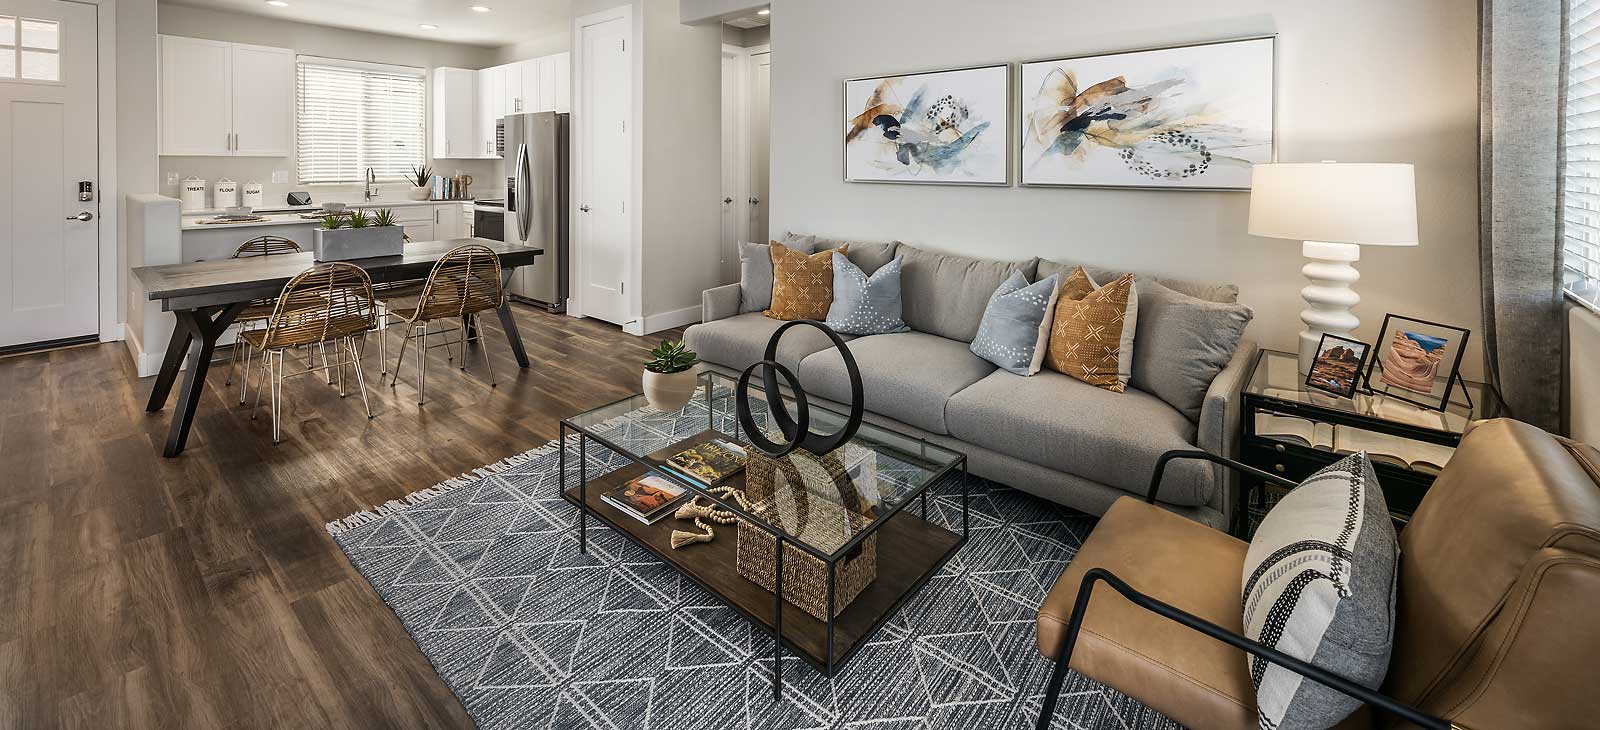 Spacious Living Area in the Village at the BLVD in Avondale